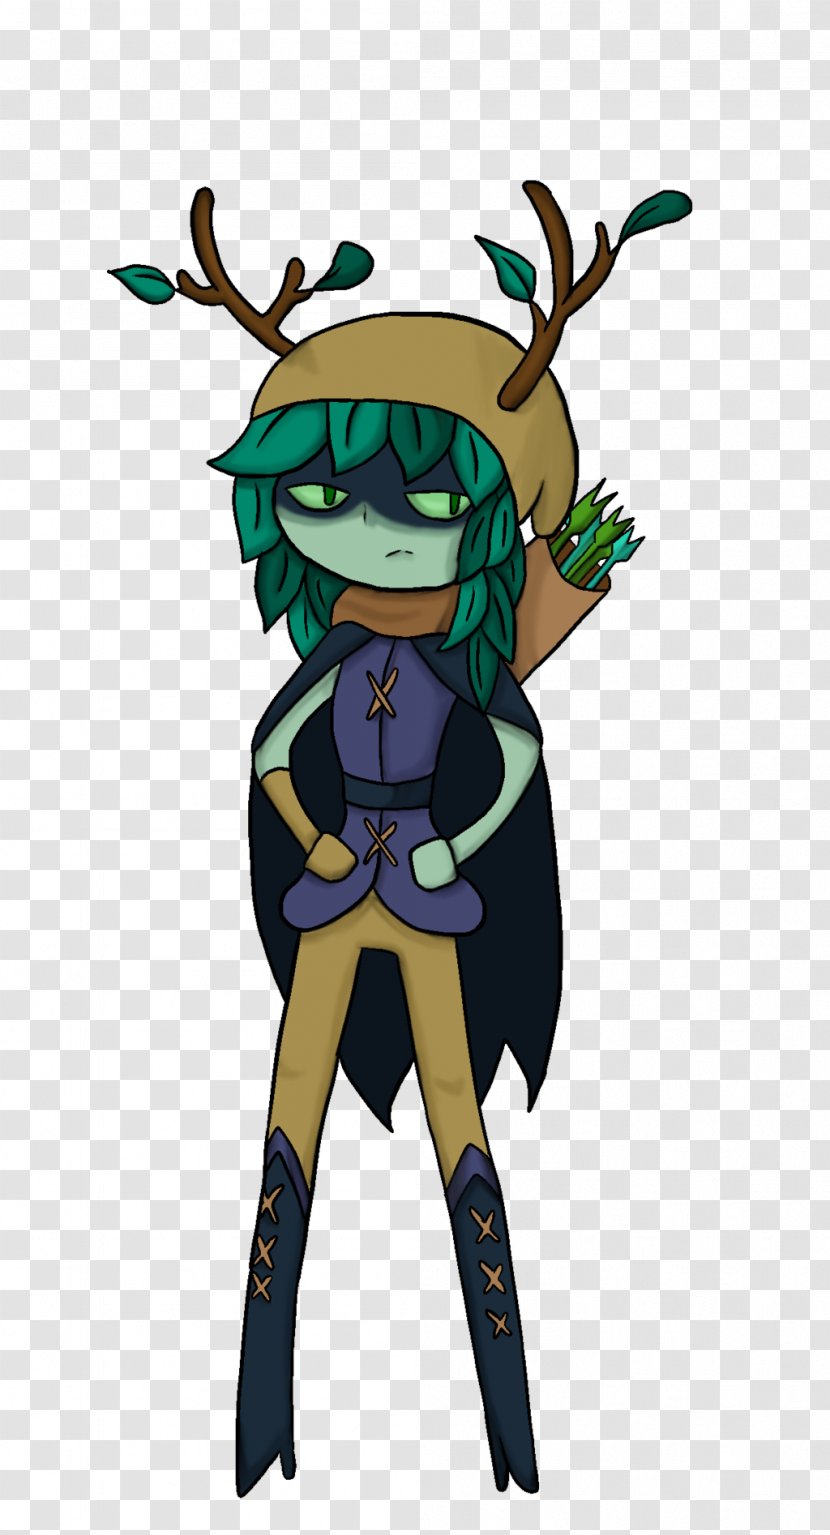 Huntress Wizard Marceline The Vampire Queen Finn Human Ice King Flame Princess - Costume Transparent PNG